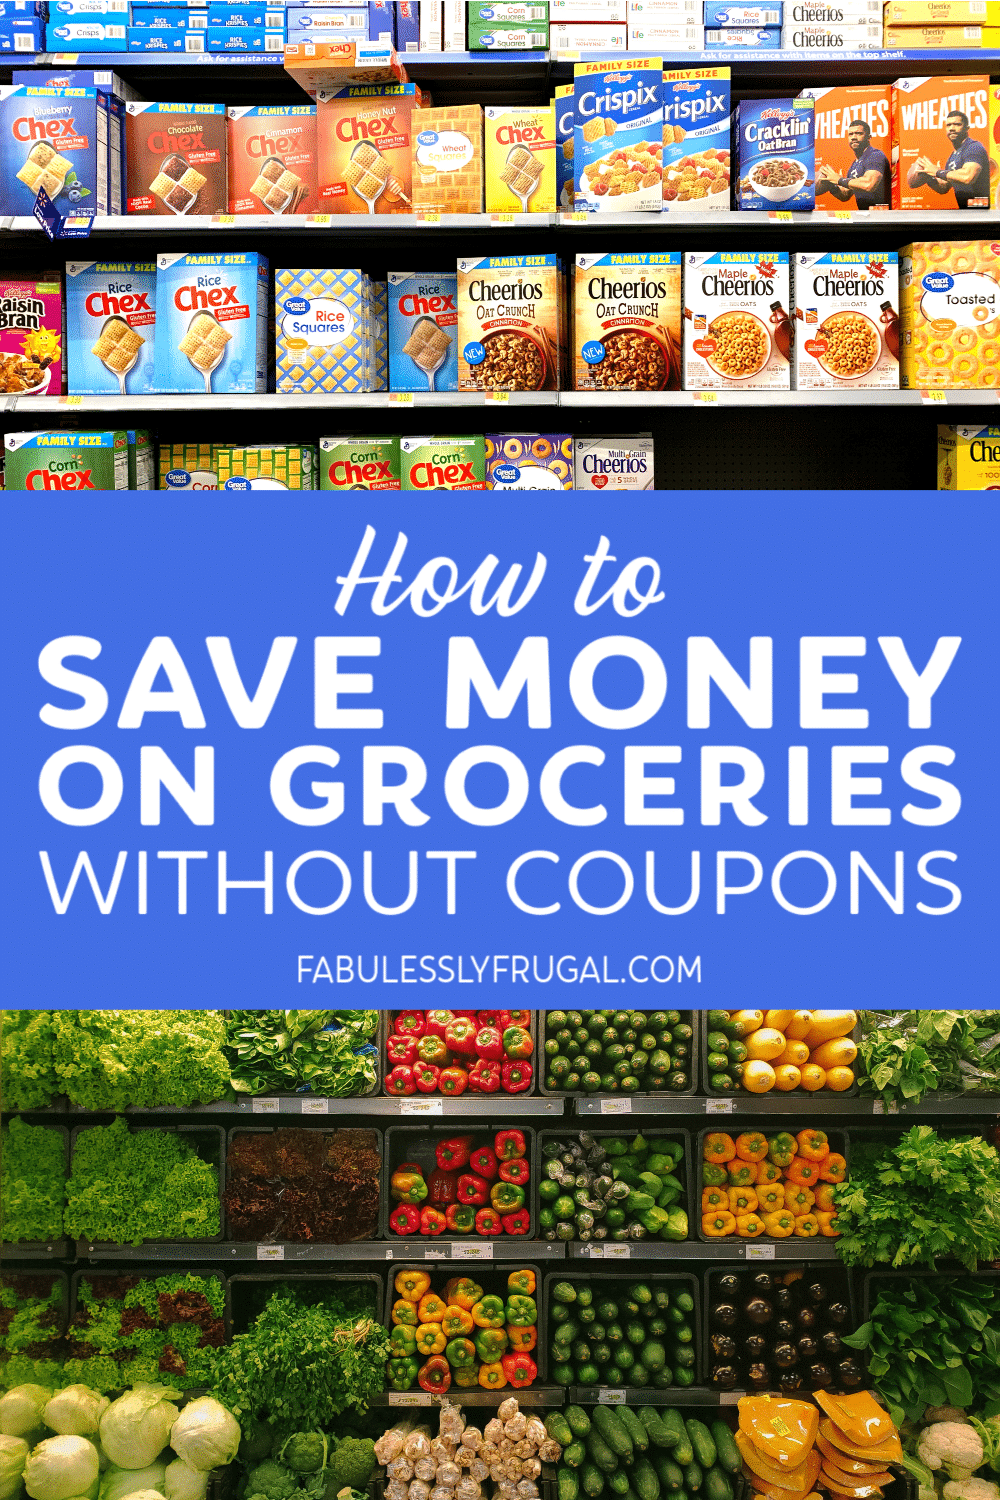 How to save money on groceries without coupons